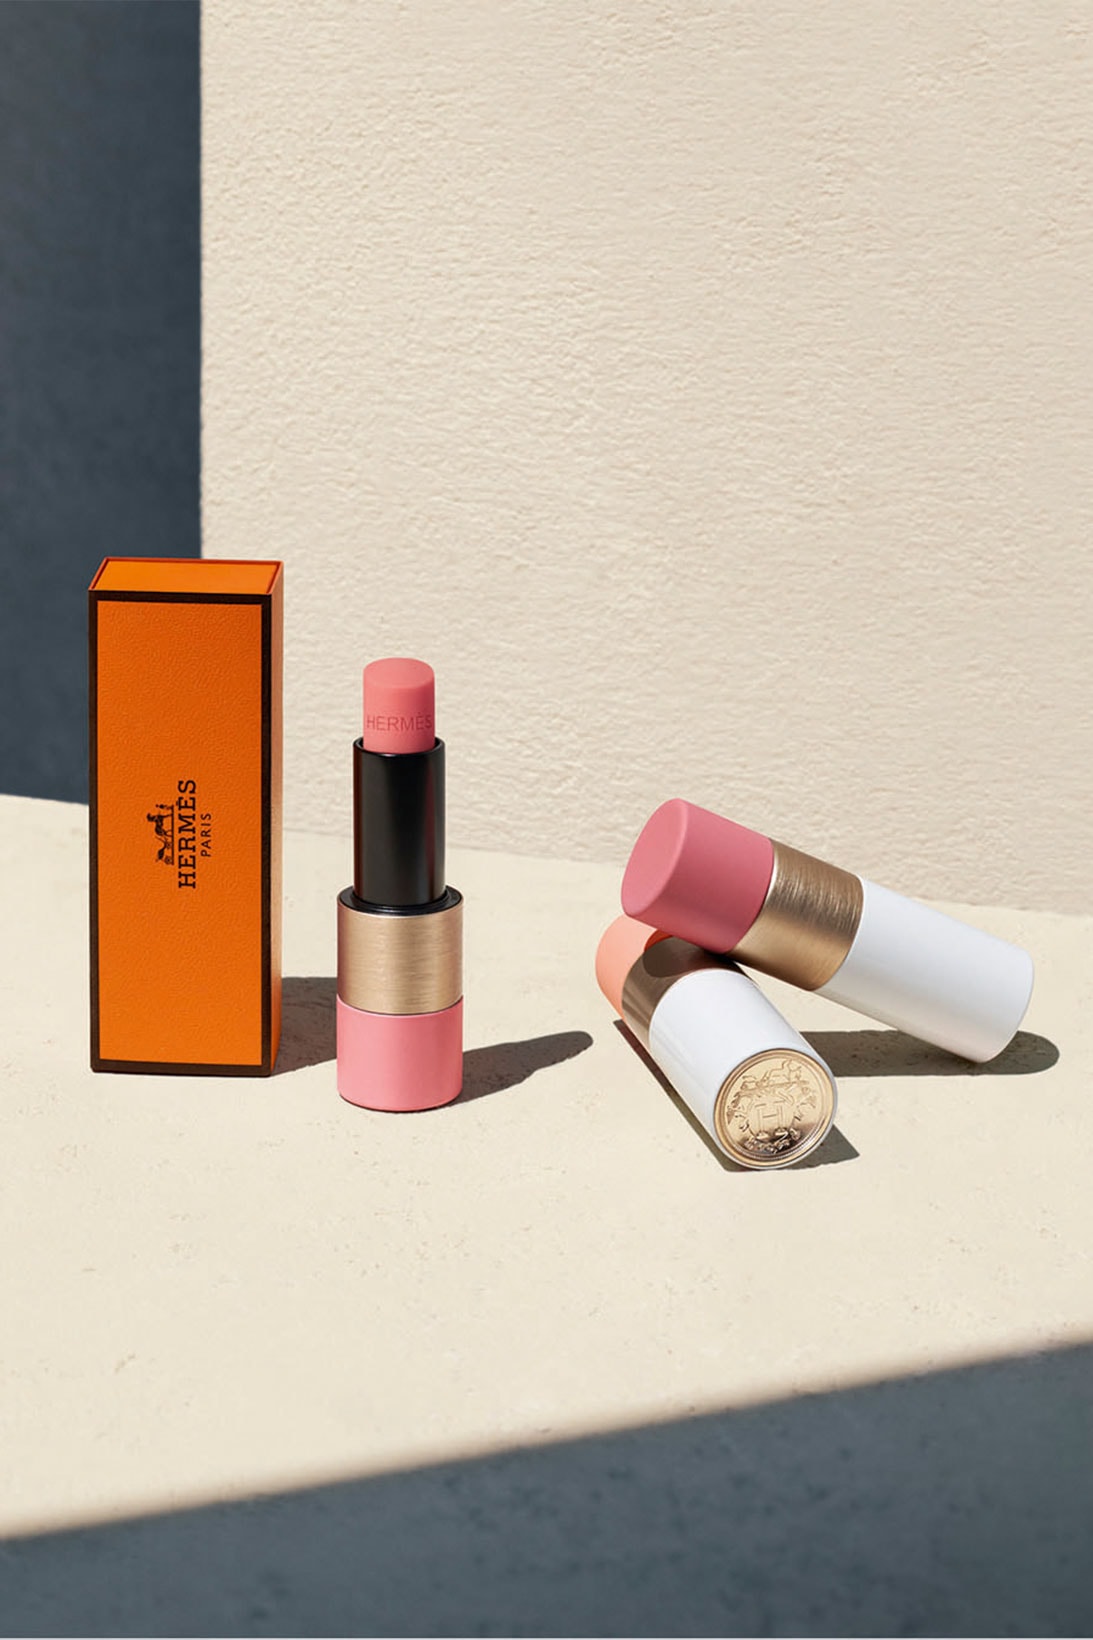 Best New Makeup Products and Beauty Products of April 2021